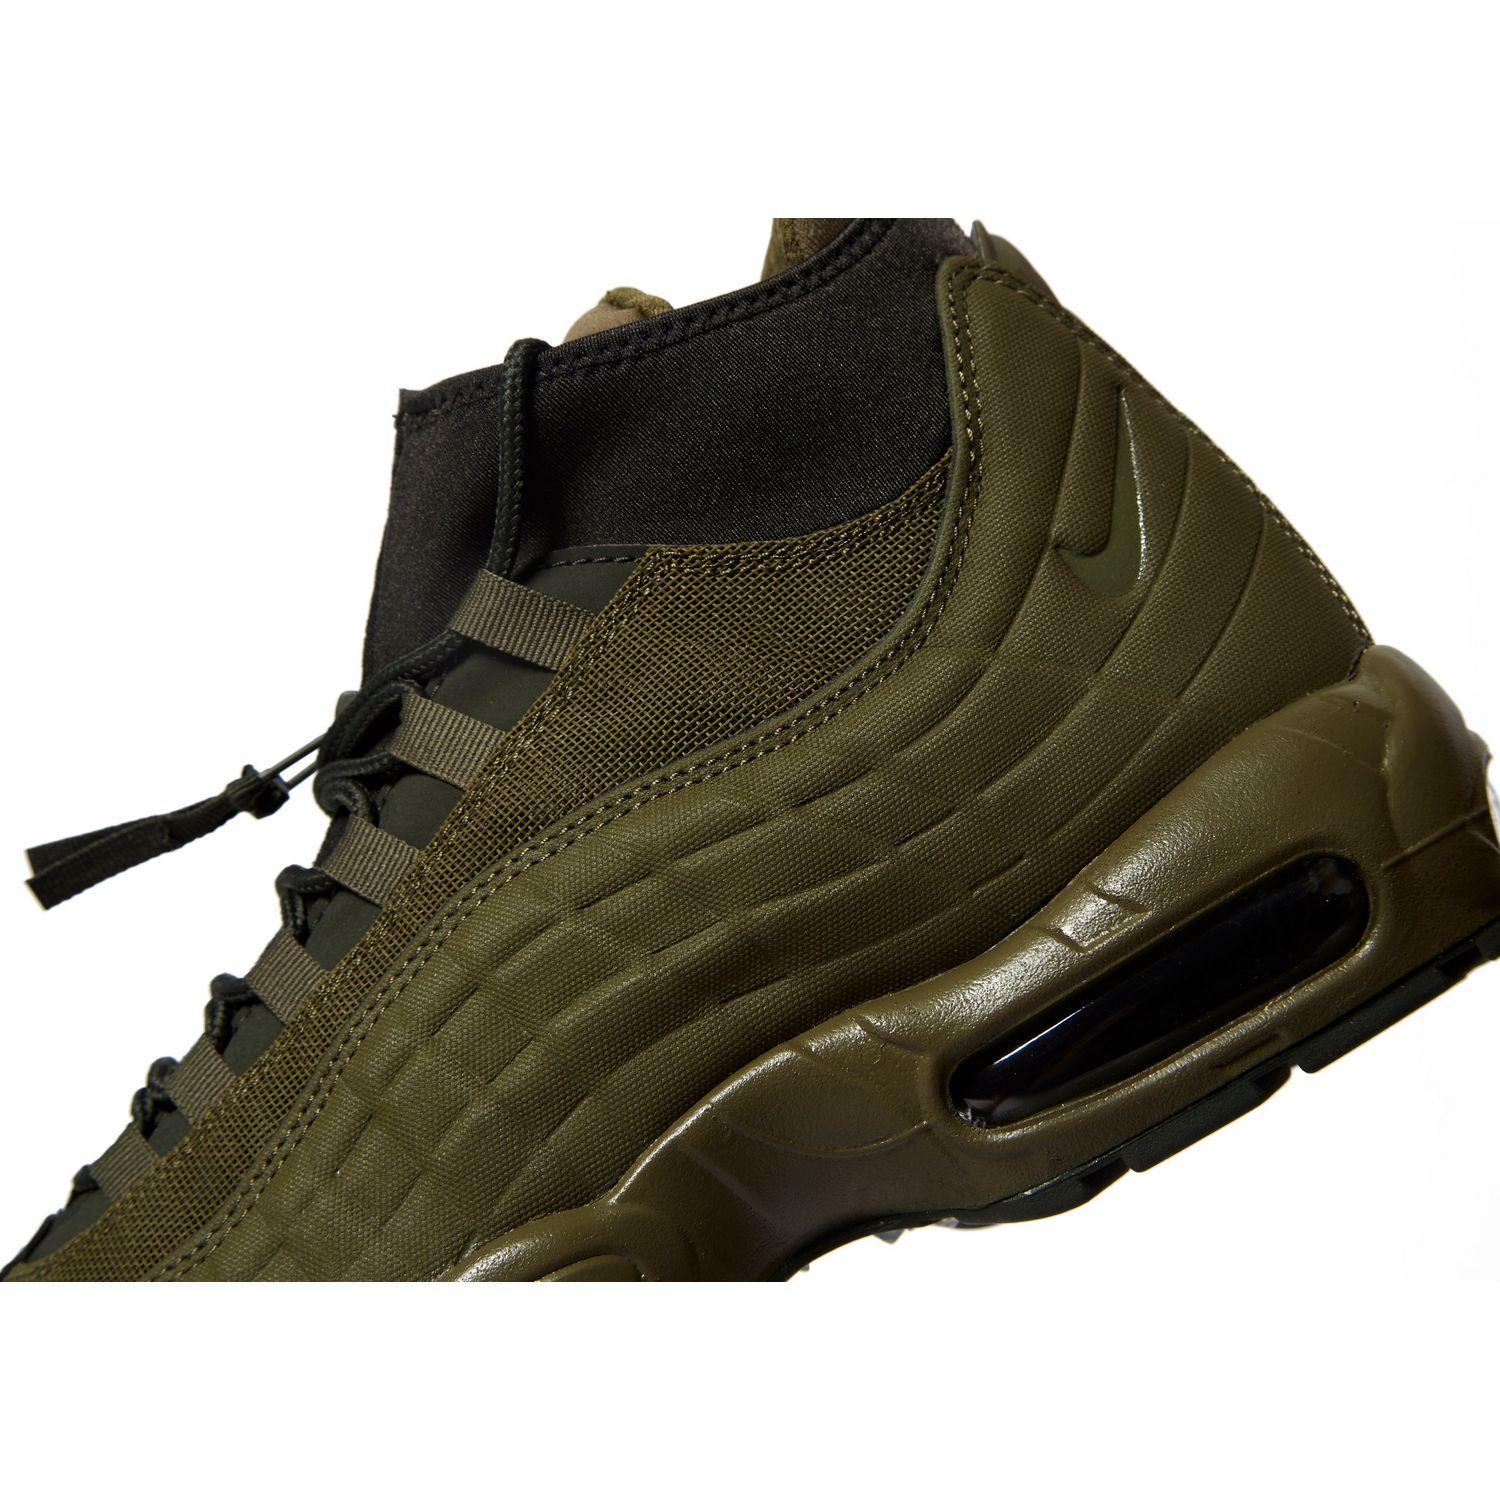 air max 95 sneakerboot olive green